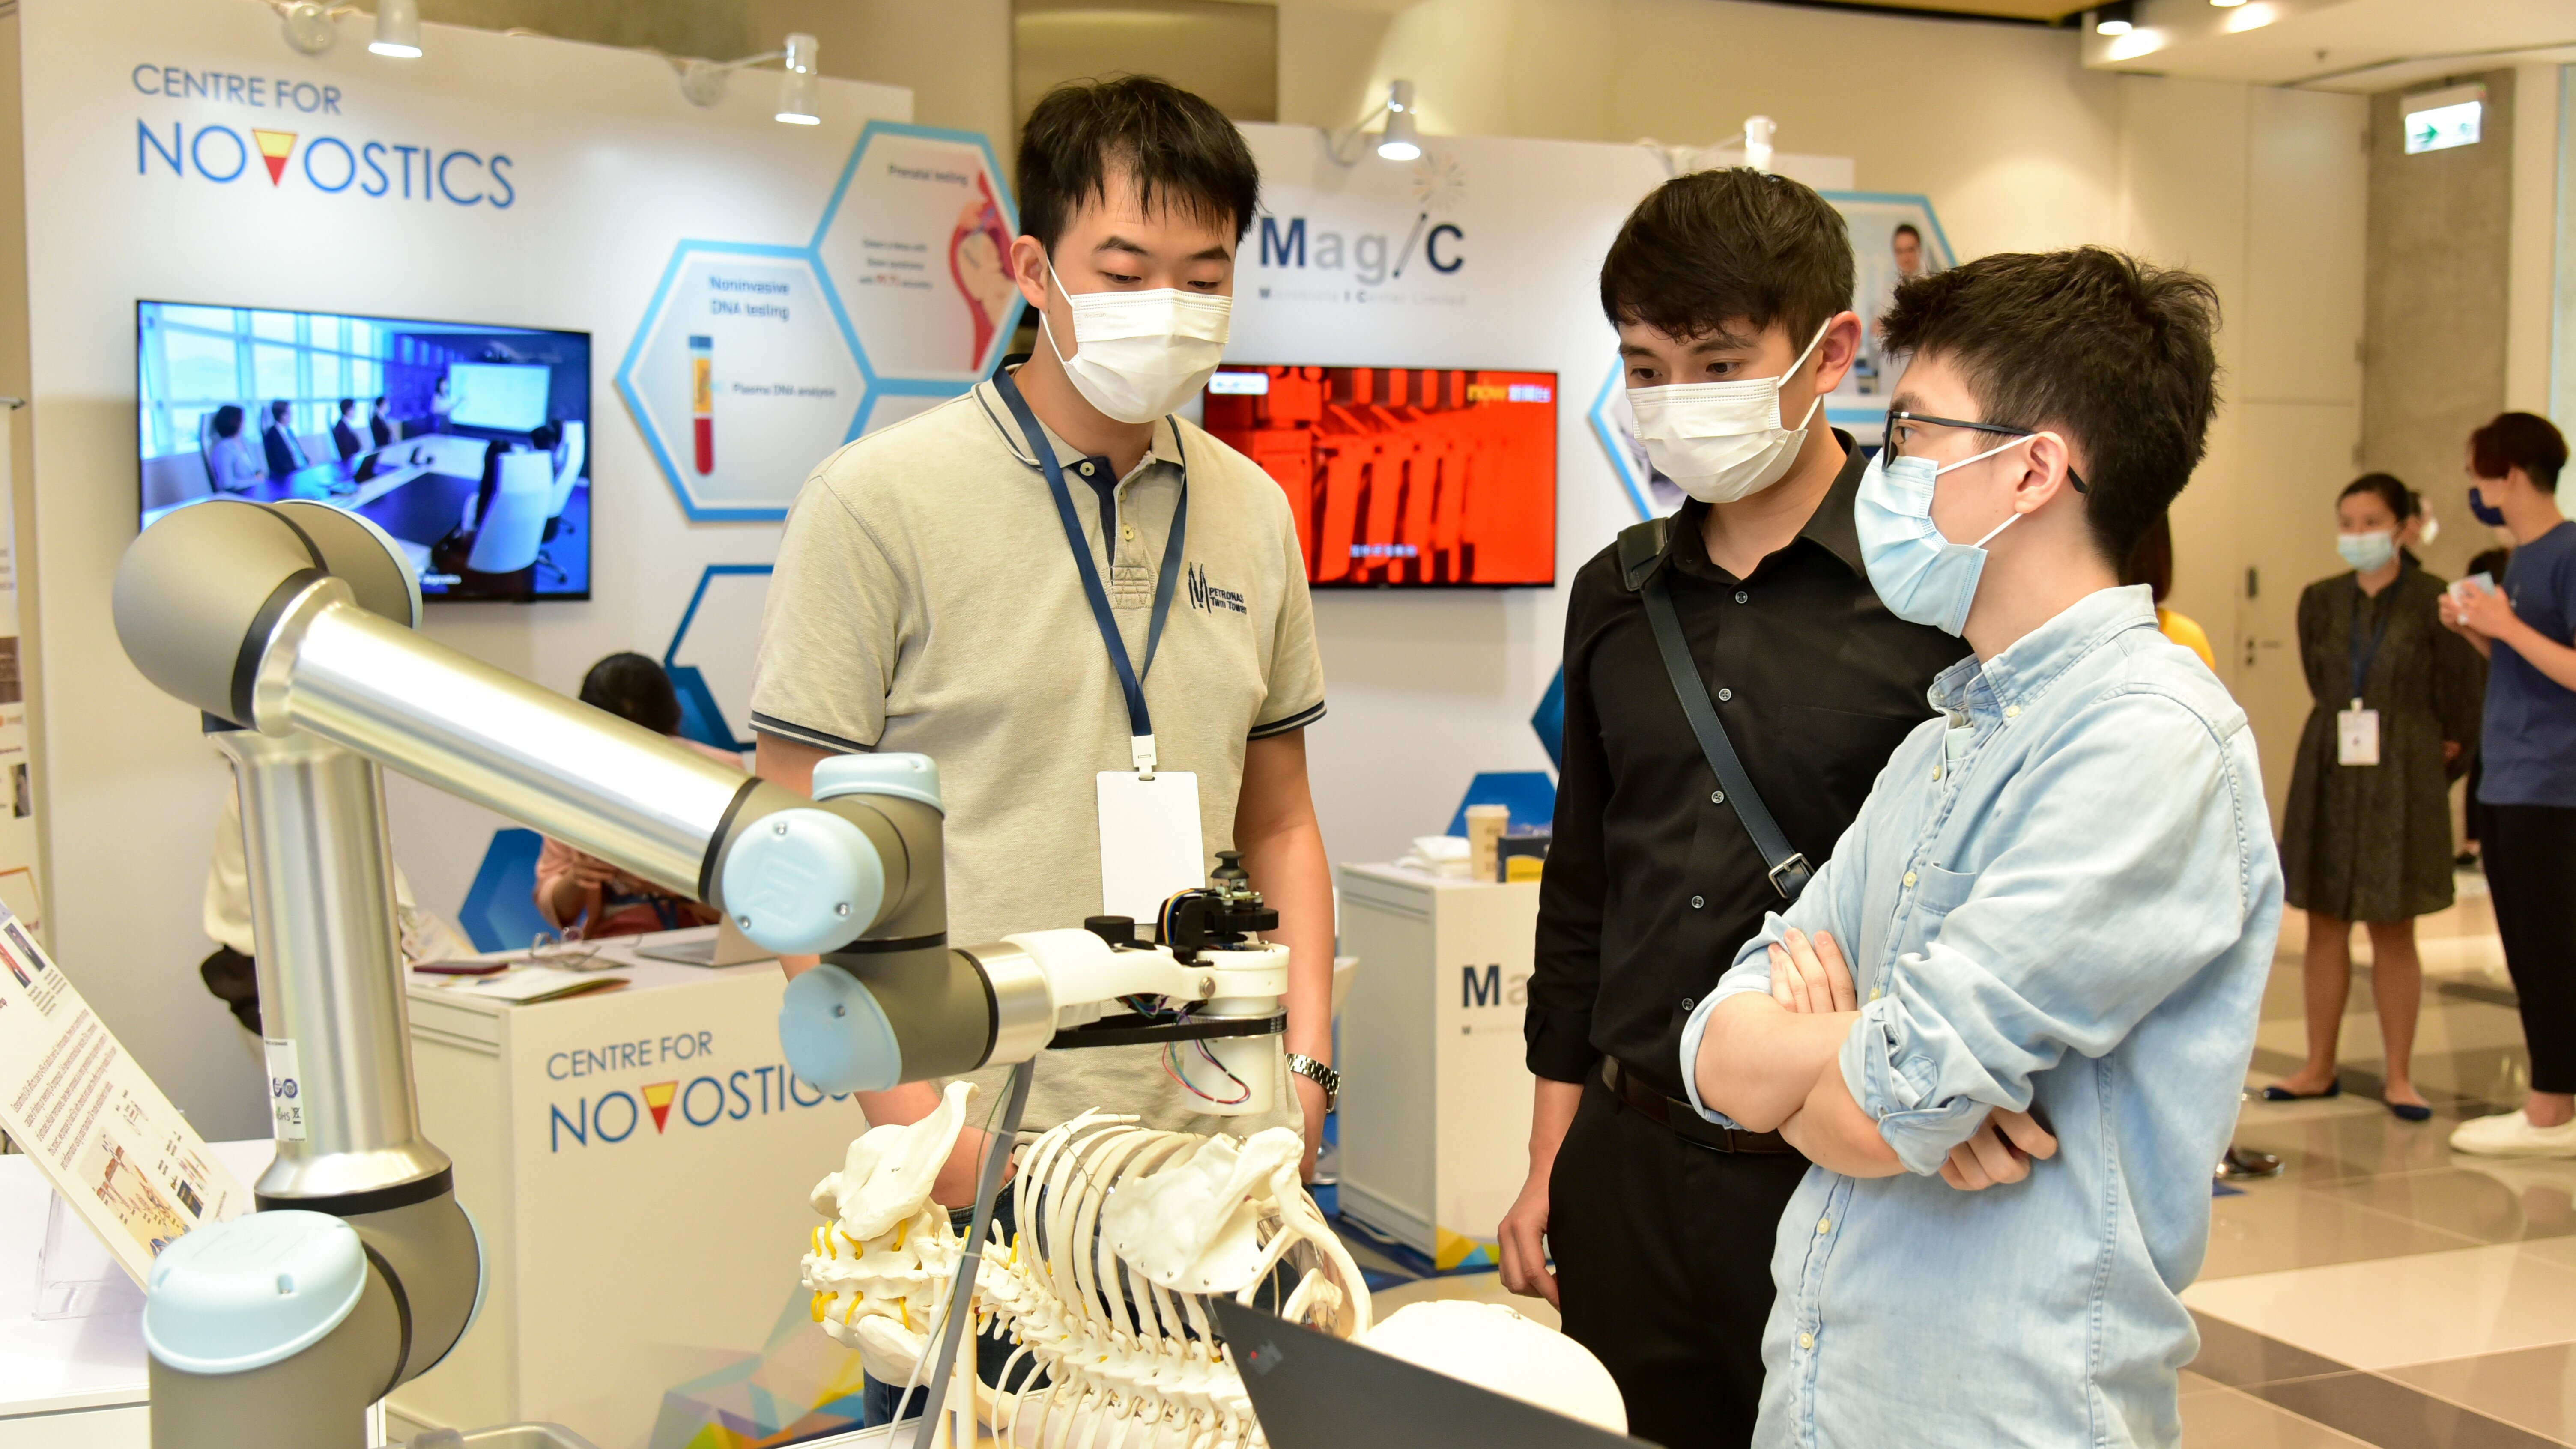 EVENT HIGHLIGHTS MRC Booth